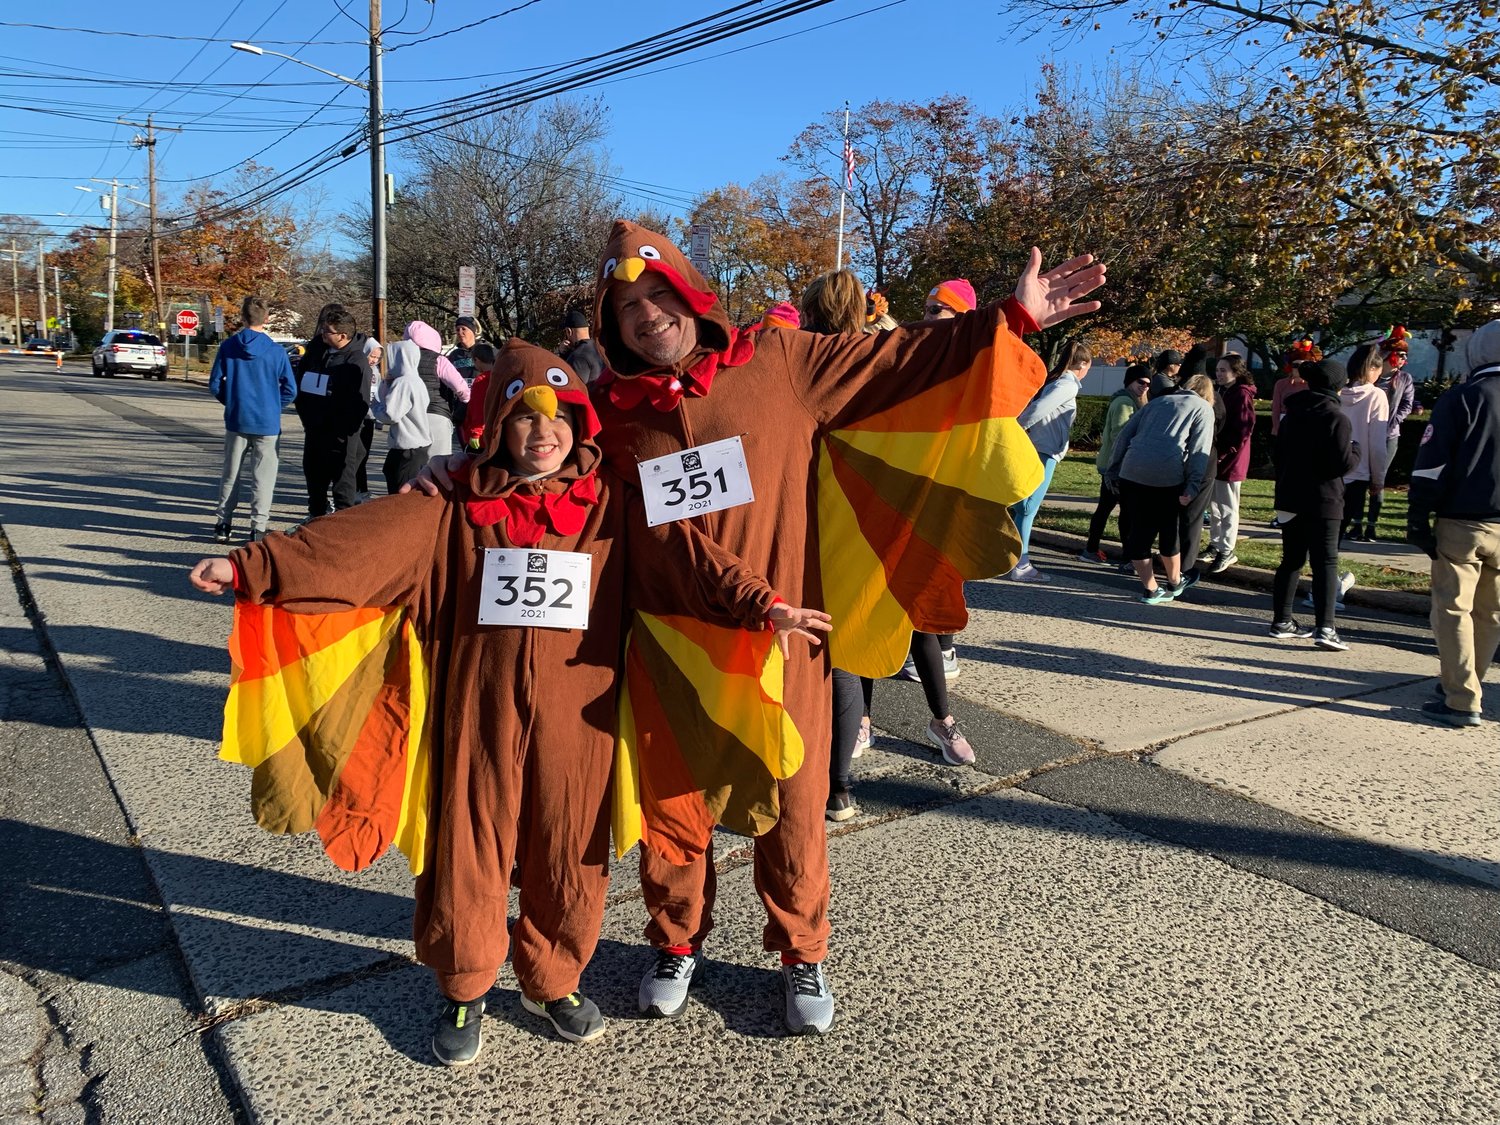 Two members of the Tomzyk family were appropriately attire for the inaugural Turkey Trot in Seaford last weekend, organized by St. William the Abbot Roman Catholic Church. The Nov. 20 race, which kicked off at 8:30 a.m. with a Fun Run, served as a fundraiser for the church.